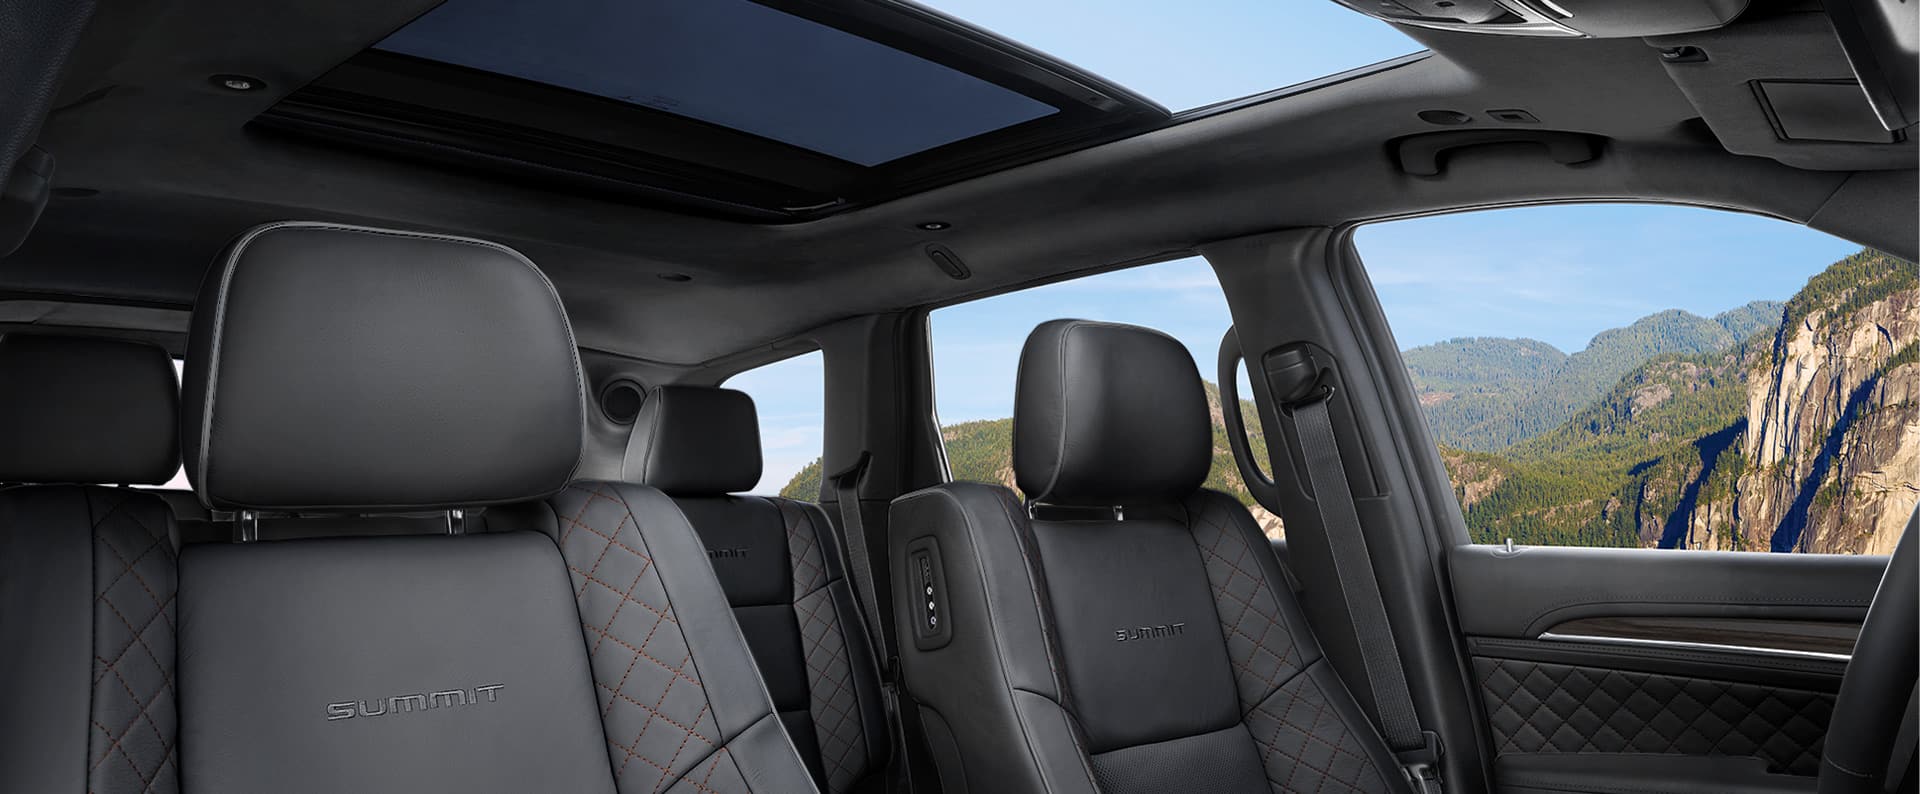 The interior of the 2021 Jeep Grand Cherokee Summit focusing on the front seats and CommandView Dual Pane Panoramic Sunroof.